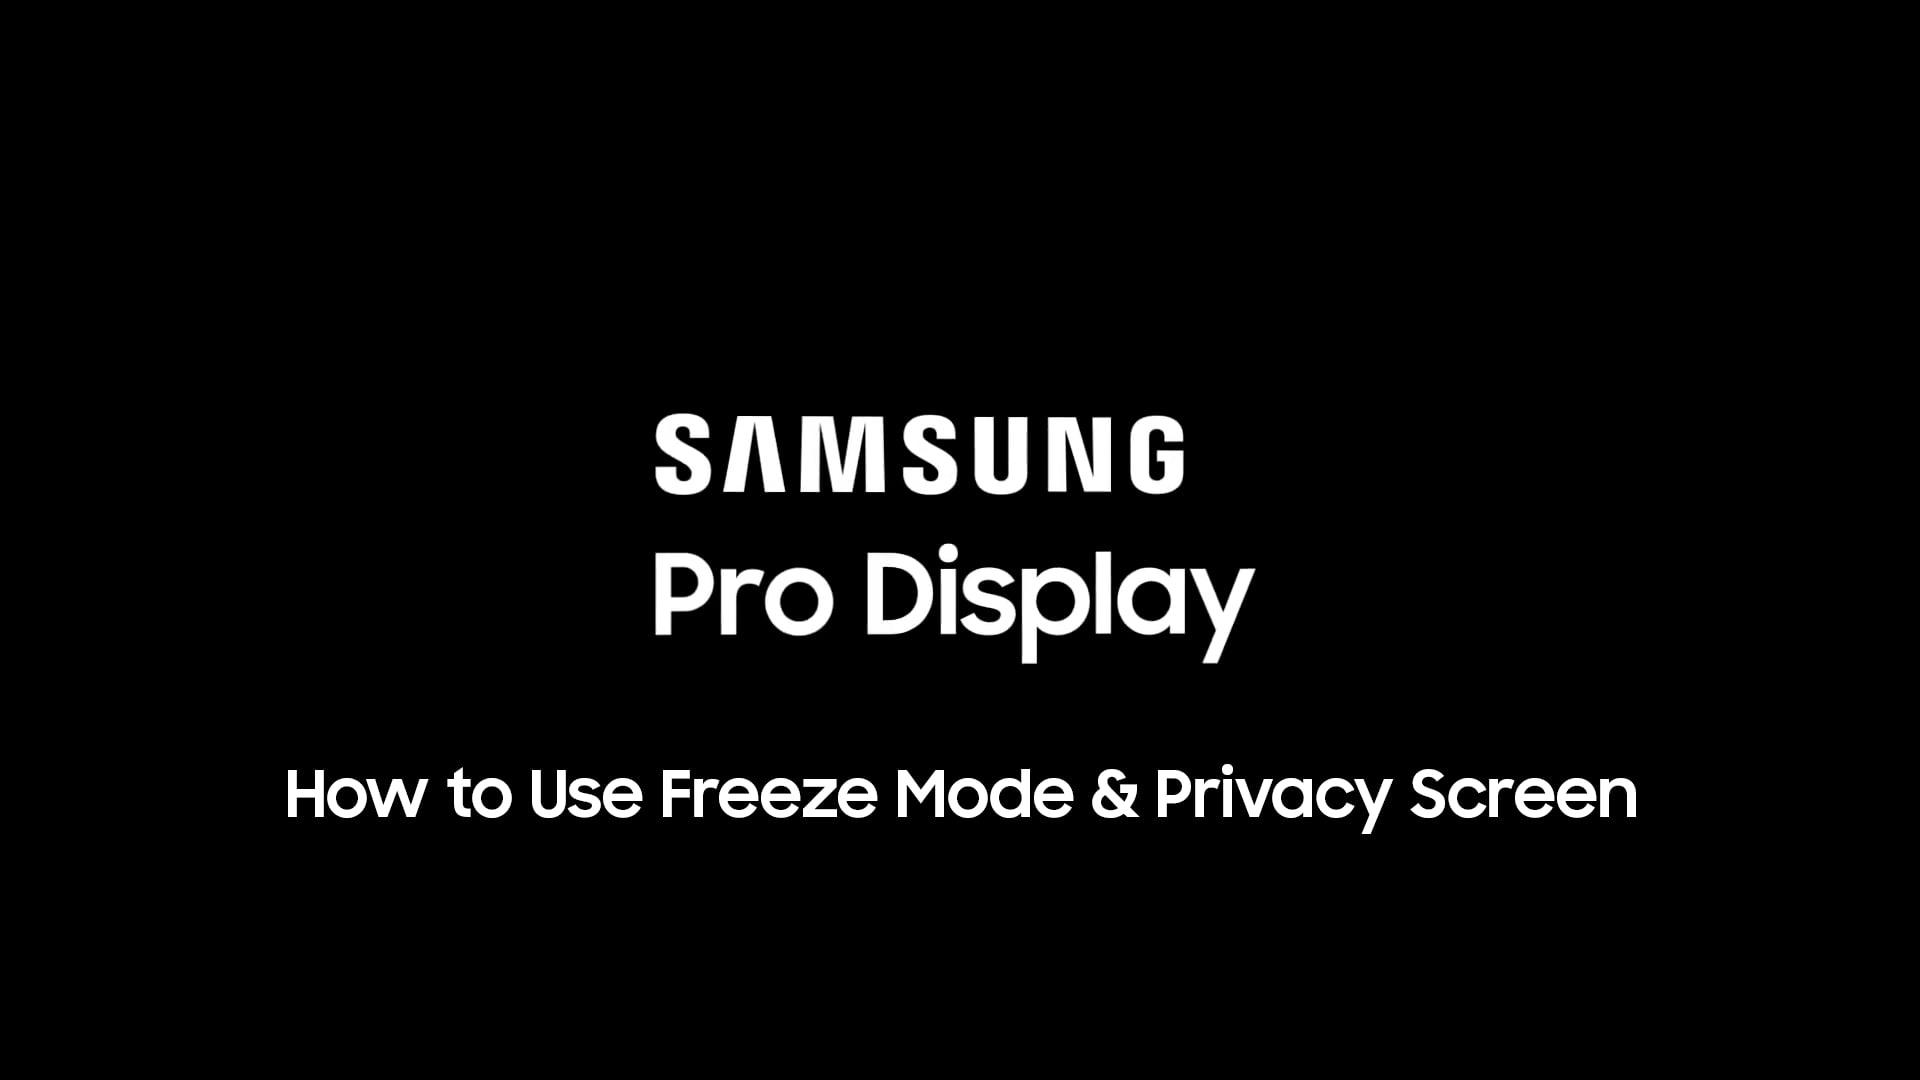 Samsung Flip Interactive Display - How to Use Freeze Mode and Privacy Screen  on Vimeo